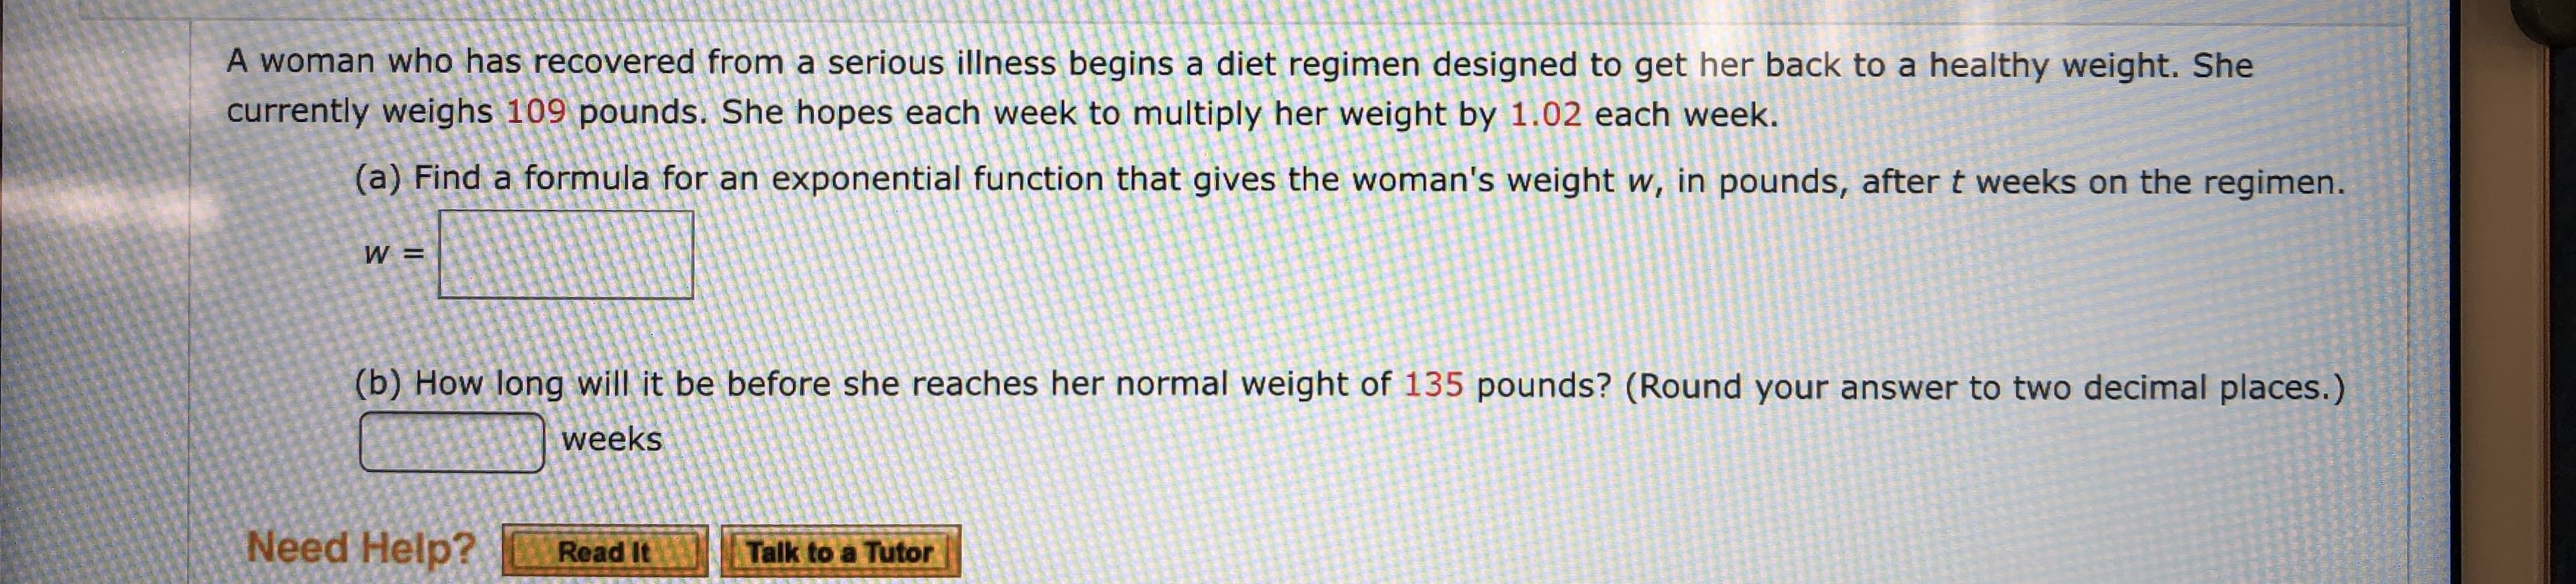 A woman who has recovered from a serious illness begins a diet regimen designed to get her back to a healthy weight. She
currently weighs 109 pounds. She hopes each week to multiply her weight by 1.02 each week.
(a) Find a formula for an exponential function that gives the woman's weight w, in pounds, after t weeks on the
regimen.
W =
(b) How long will it be before she reaches her normal weight of 135 pounds? (Round your answer to two decimal places.)
weeks
Need Help?
Talk to a Tutor
Read It
